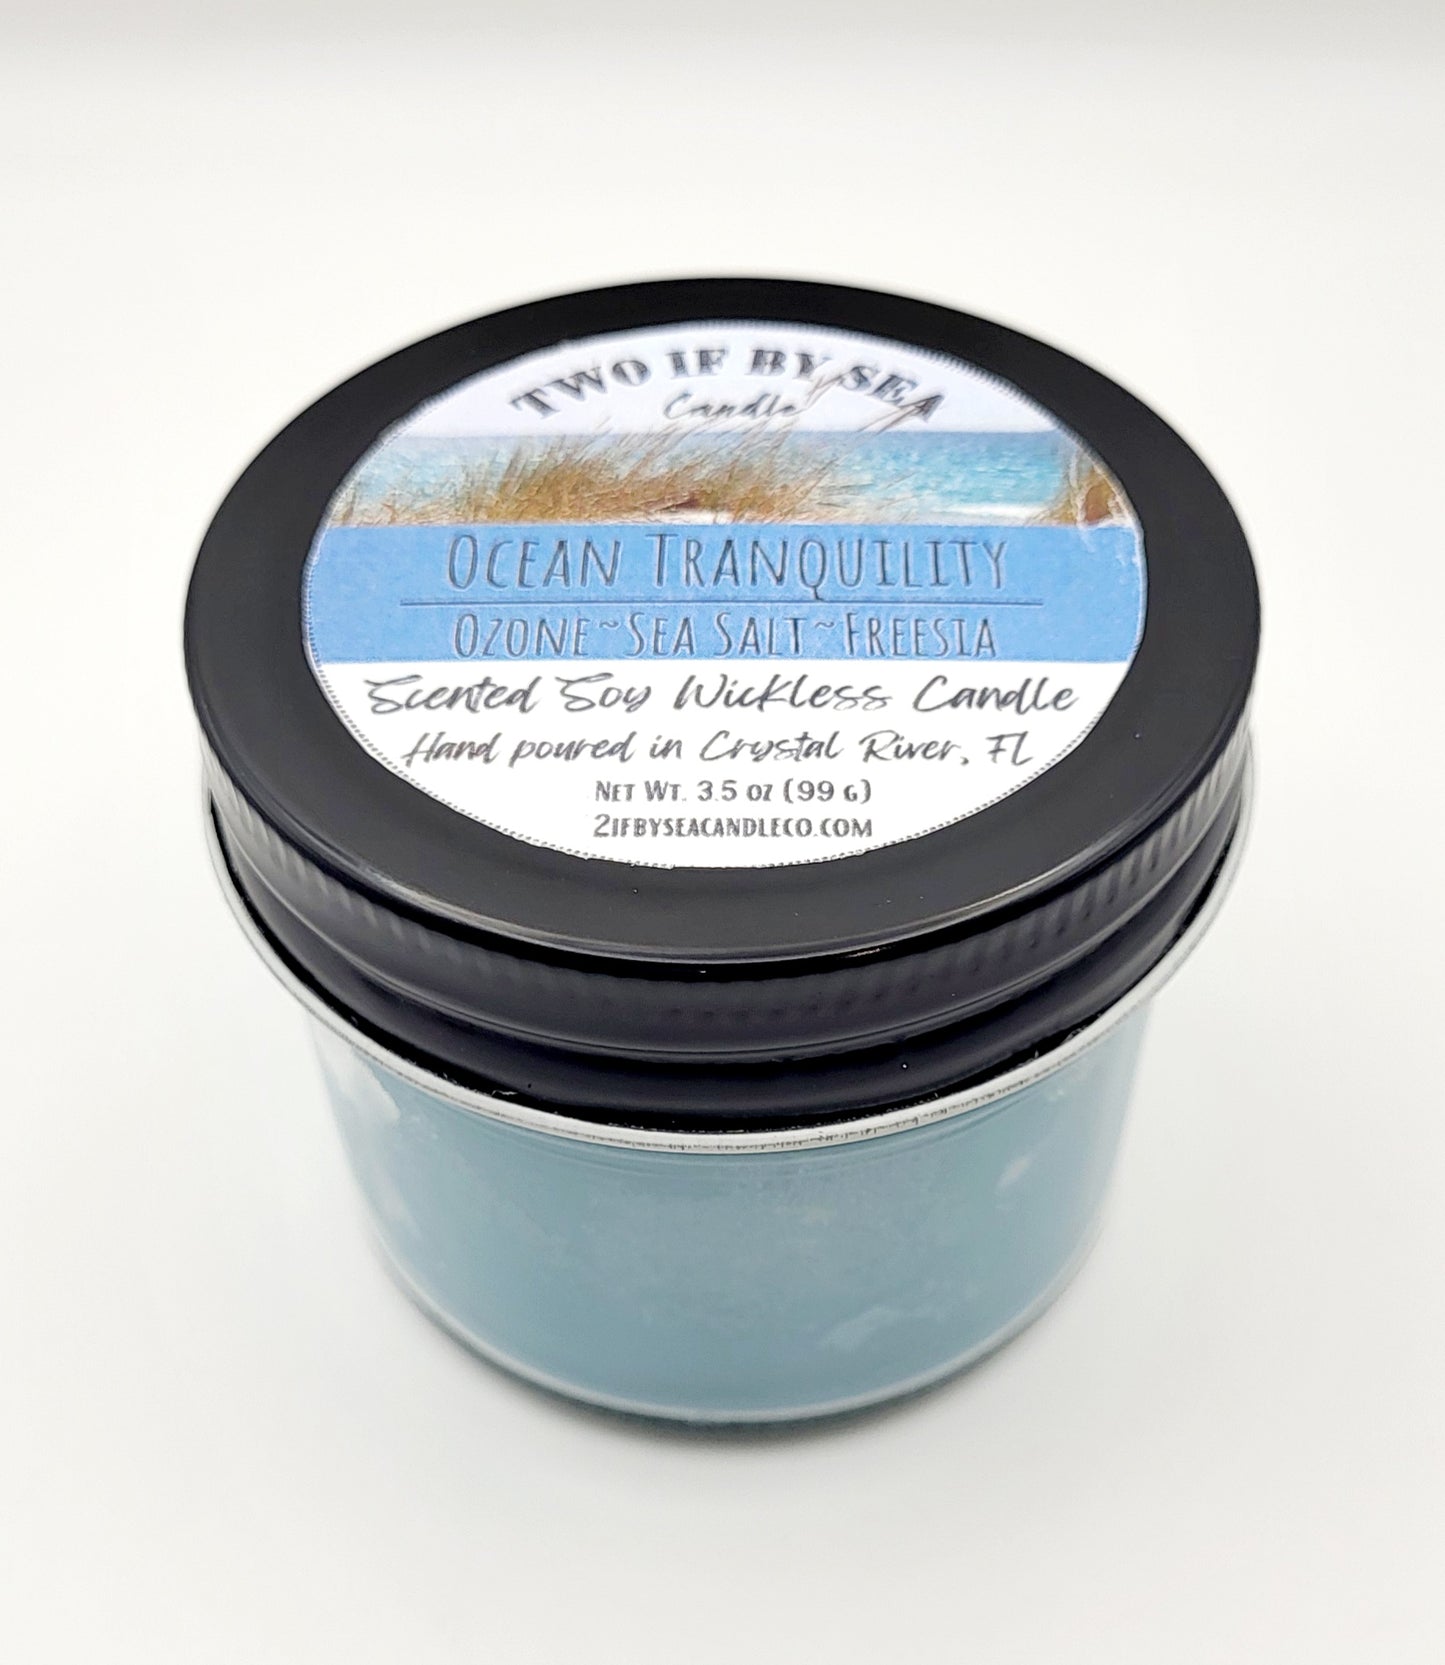 Ocean Tranquility Scented Soy/Coconut Candle